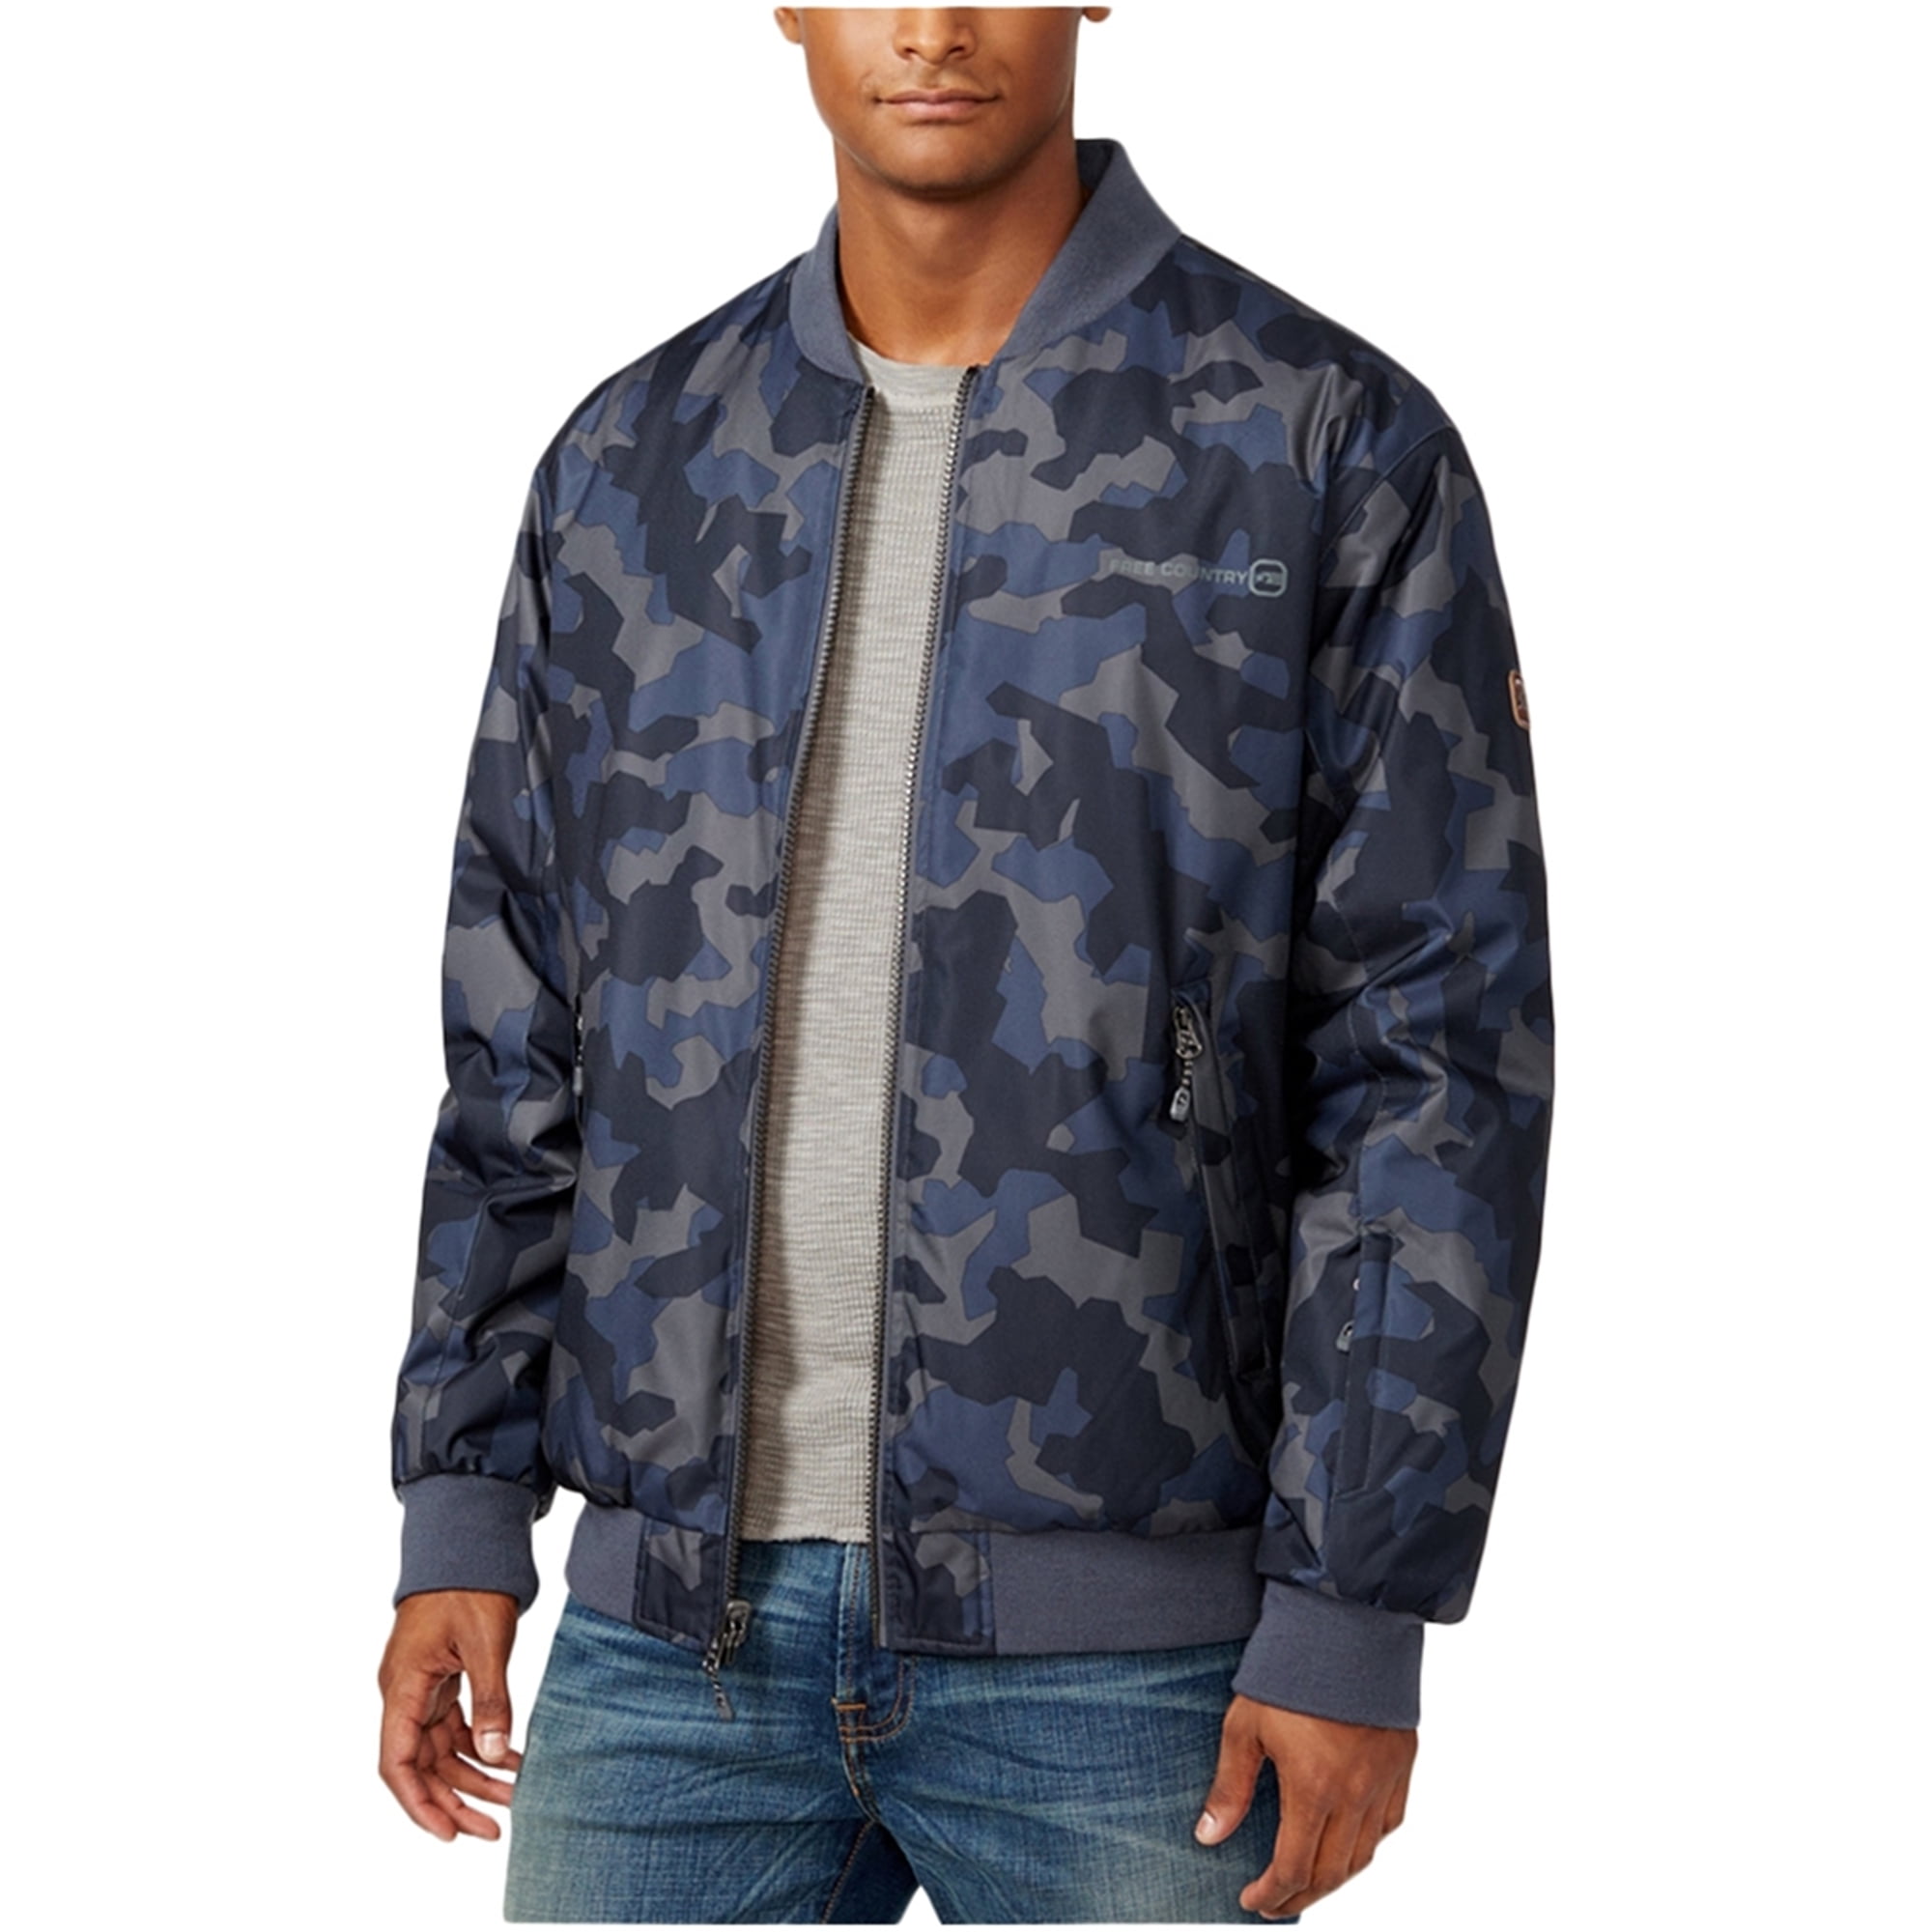 Free Country Mens Reversible Camo Bomber Jacket, Brown, X-Large -  Walmart.com